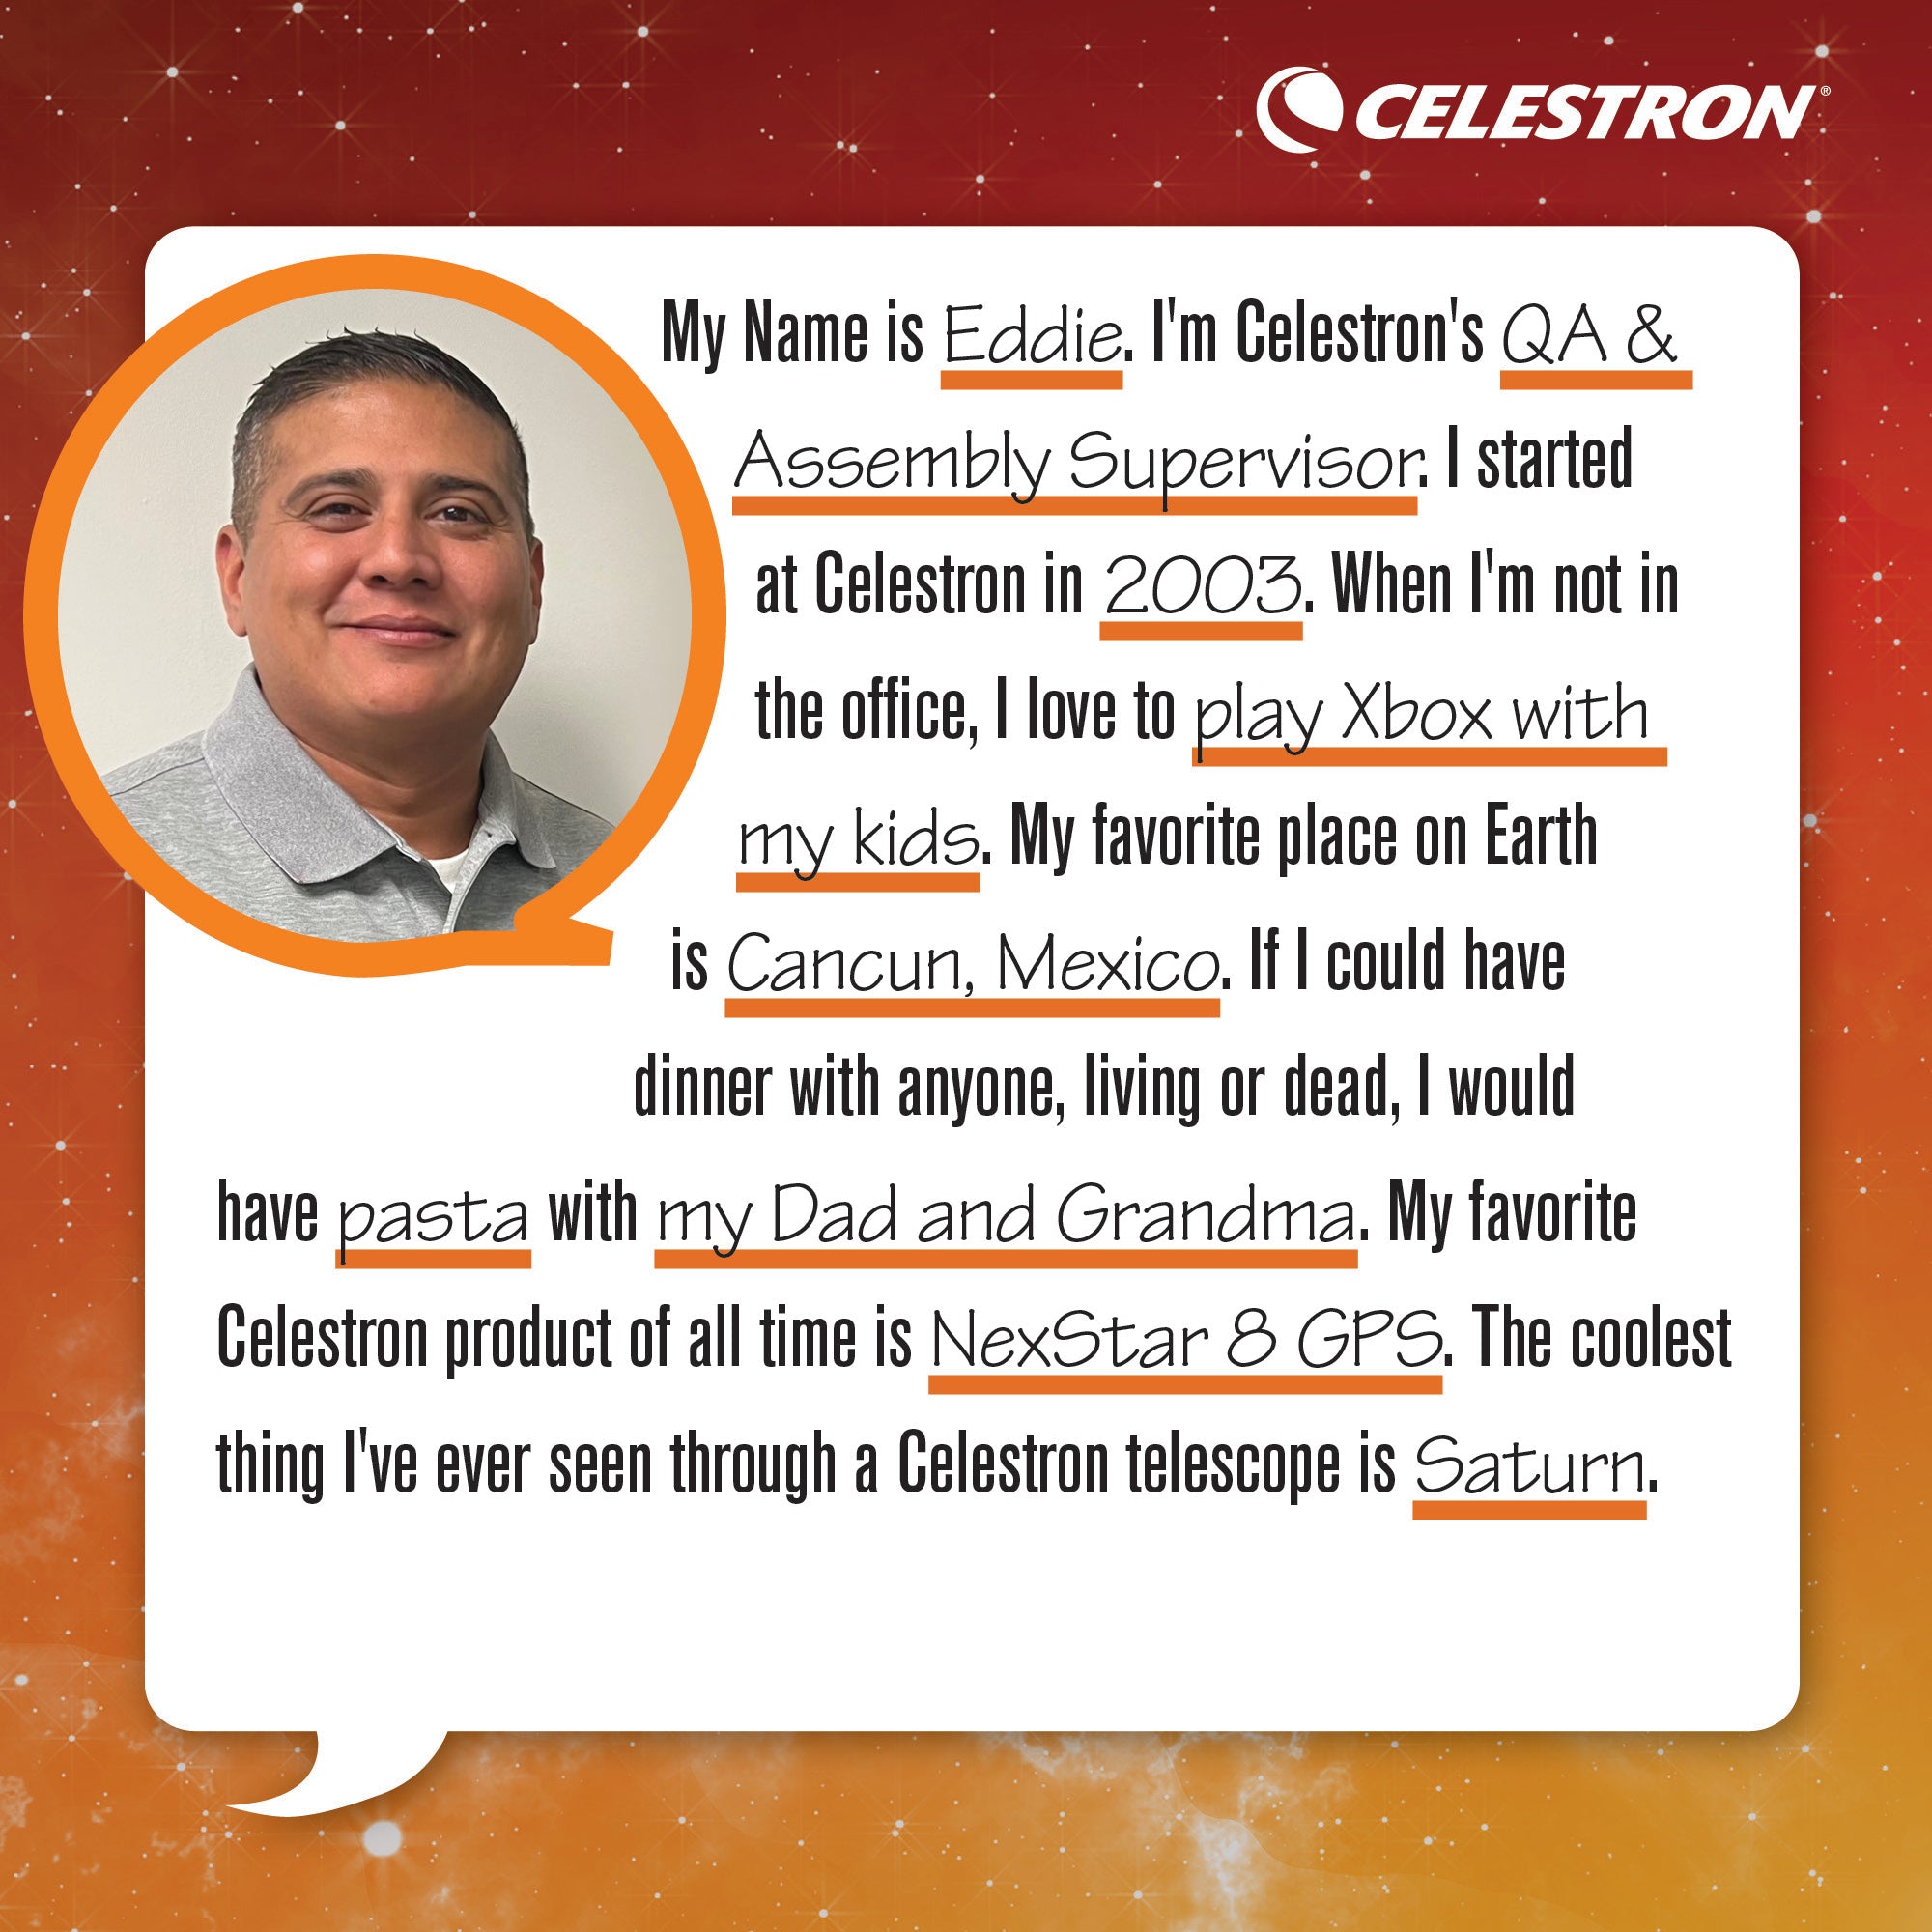 My name is Eddie. I am a Celestron QA & Assembly Supervisor. I started at Celestron in 2003. When I'm not in the office, I play Xbox with my kids. My favorite place on Earth is Cancun, Mexico. If I could have dinner with anyone, living or dead, I would have pasta with my dad and grandma. My favorite Celestron product of all time is NexStar 8GPS. The coolest thing I've ever seen through a telescope is Saturn.